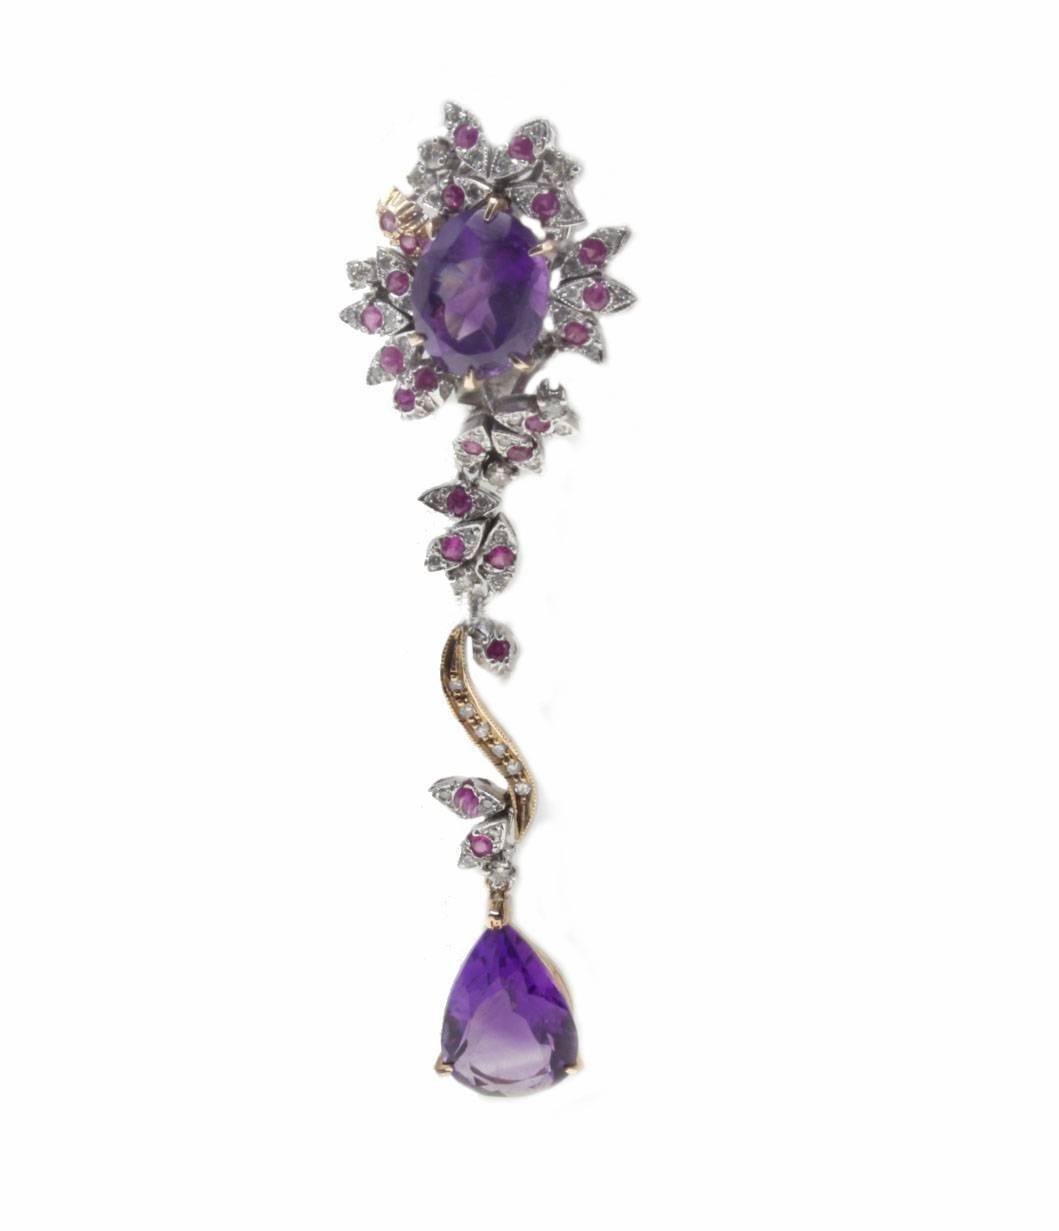 Charming dangle earrings mounted in 14Kt rose gold and 14Kt white gold.On top of it there is an amethyst surrounded of diamonds and rubies, a 